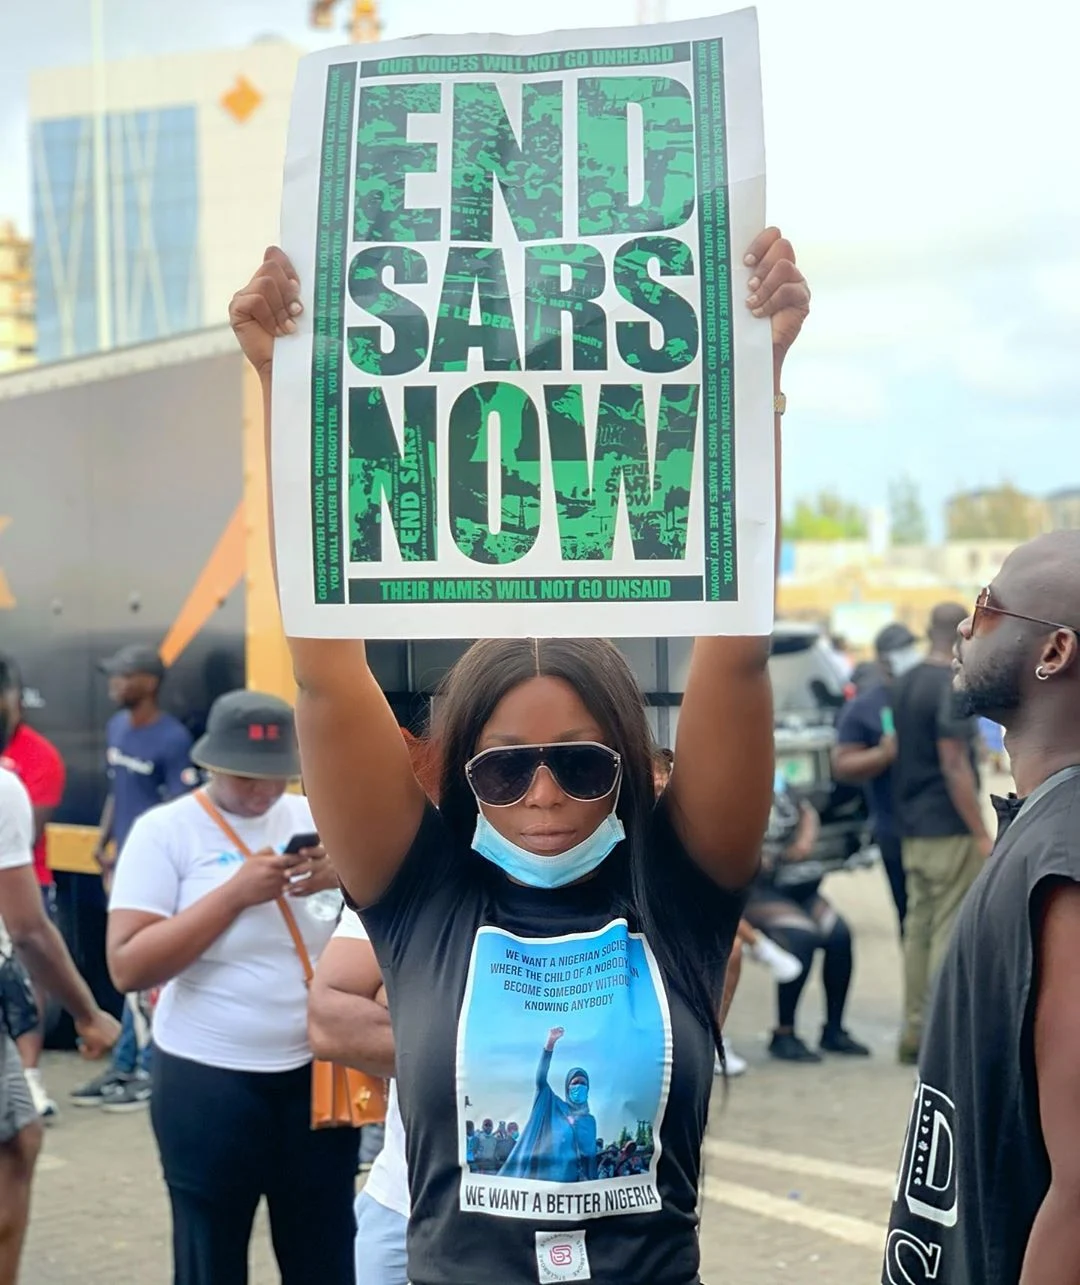 END SARS IN ABUJA